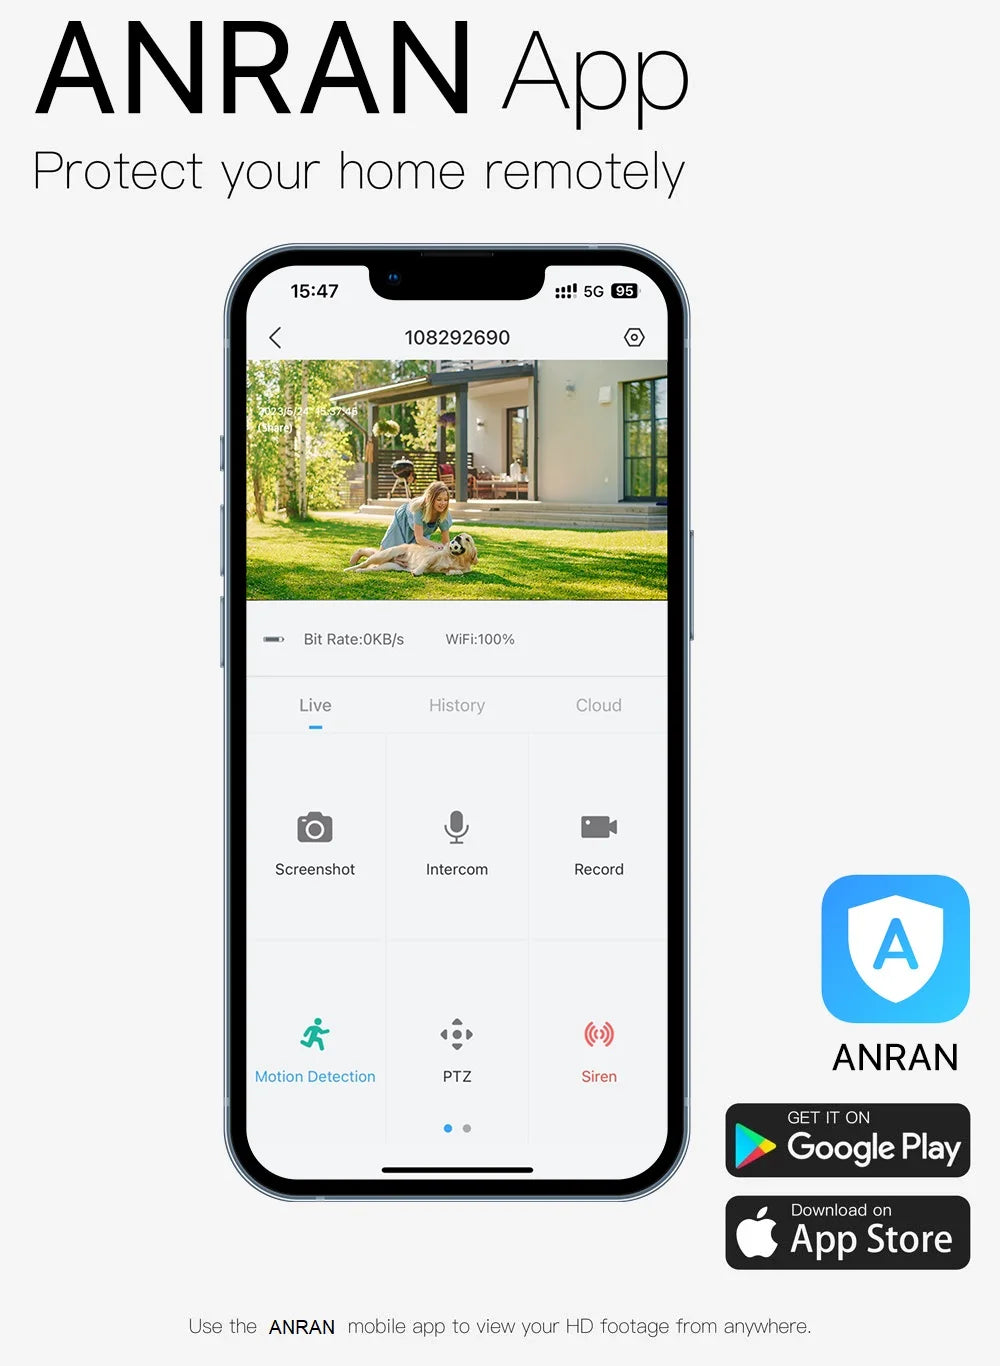 ANRAN 3MP Battery Camera, Monitor home remotely with ANRAN app: live HD footage, screenshots, intercom recordings, and motion alerts.